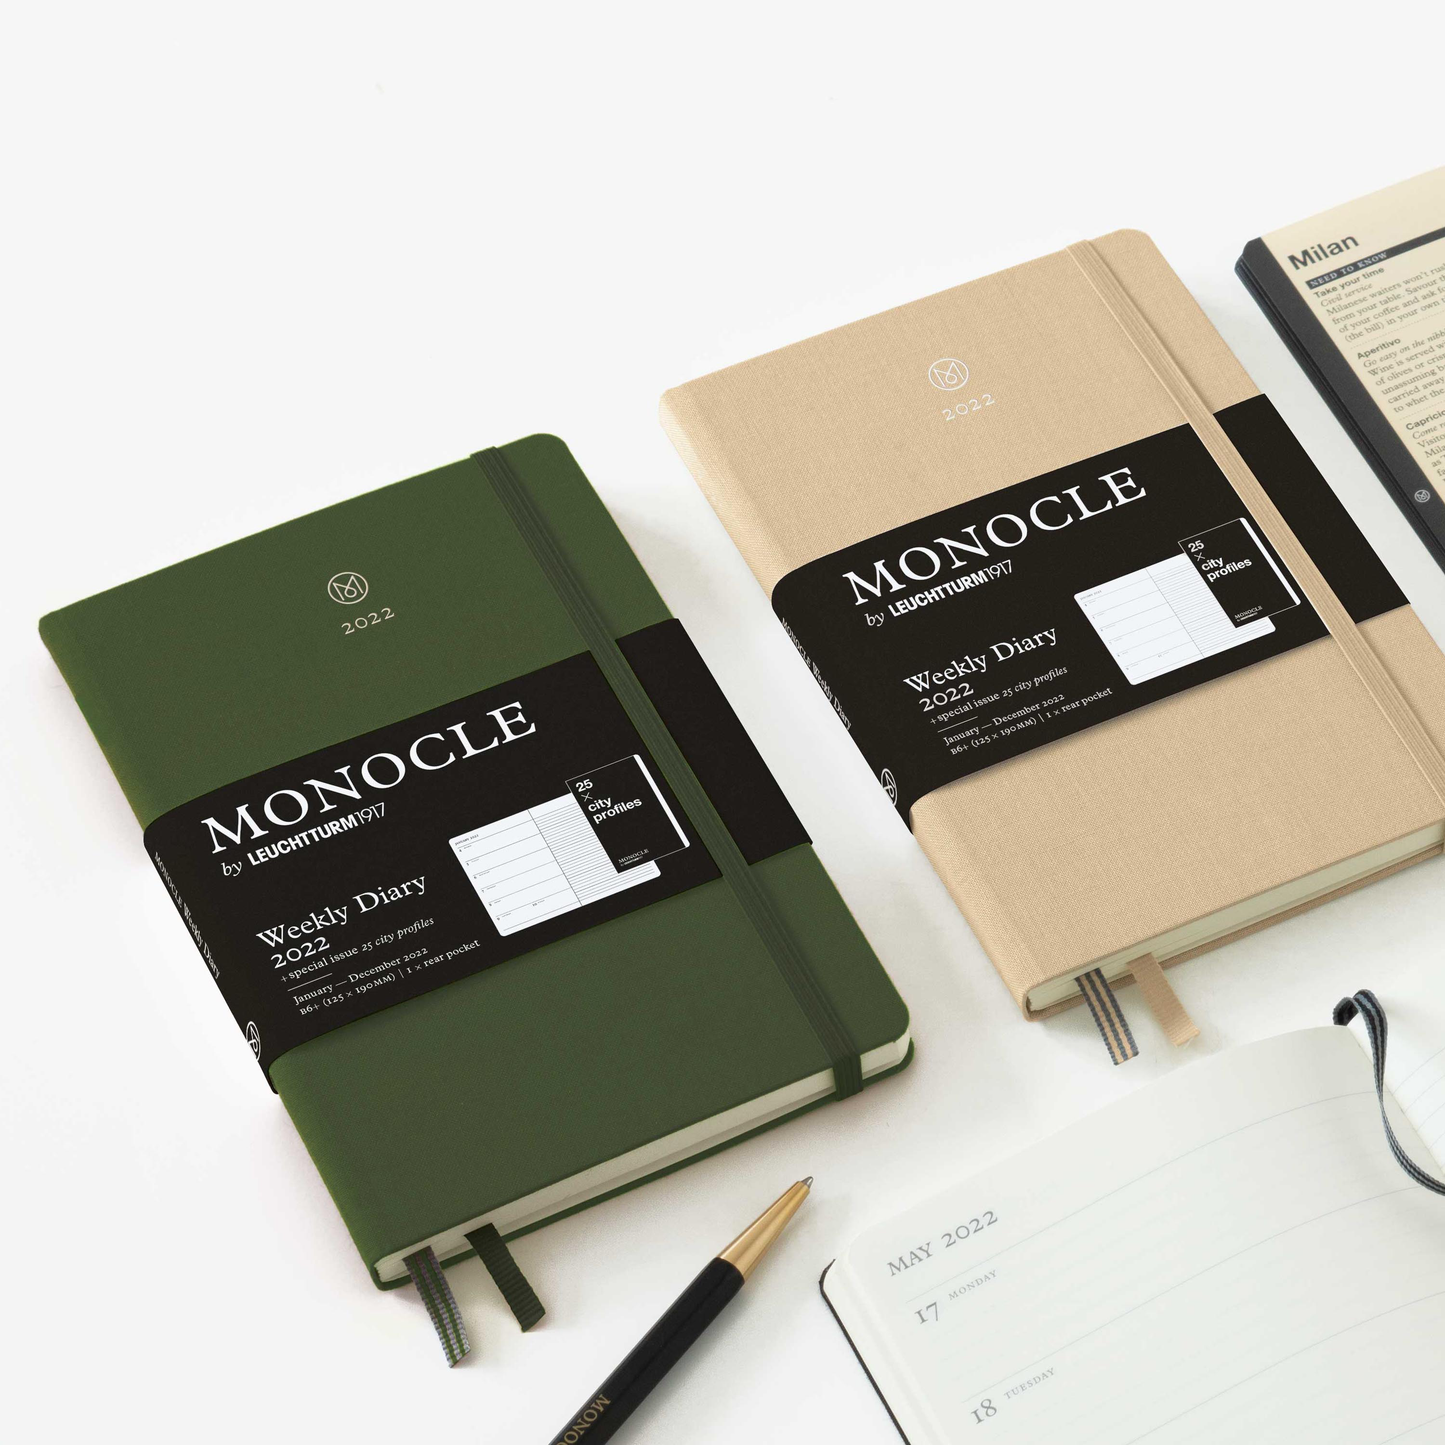 Monocle Weekly Diary & Notebook 2022 B6 - Olive